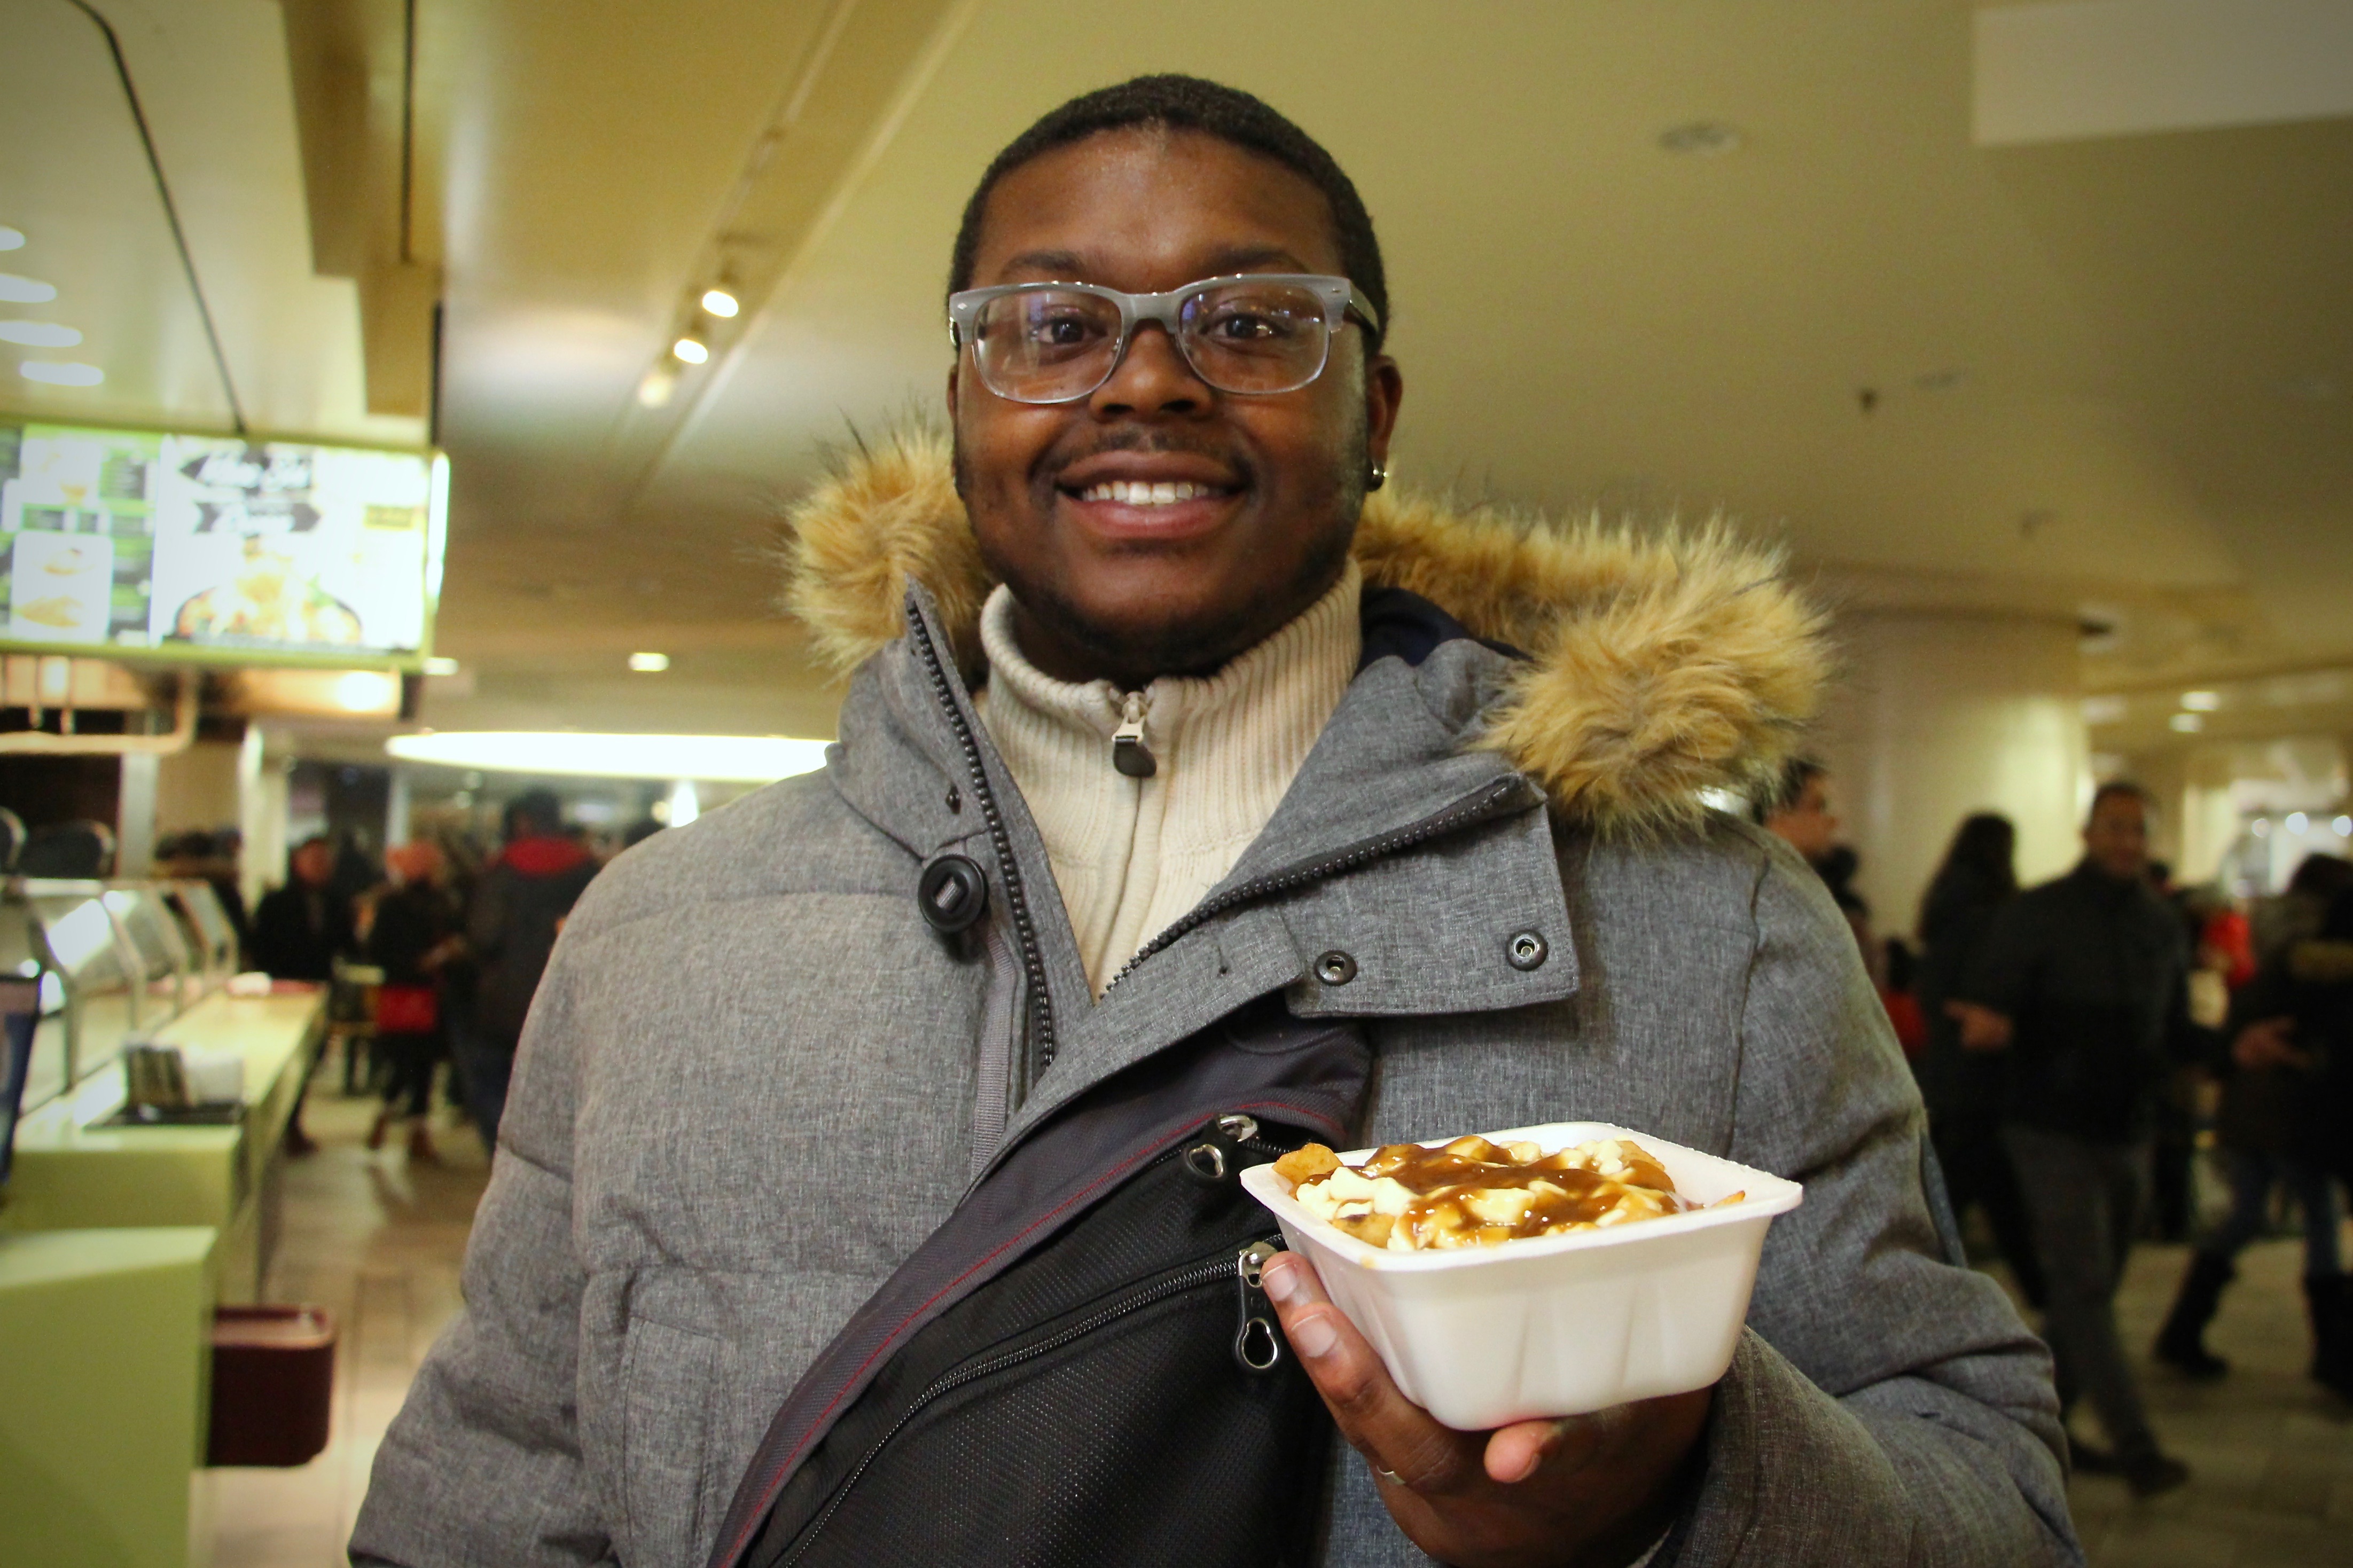 Jalen holding a serving of poutine.